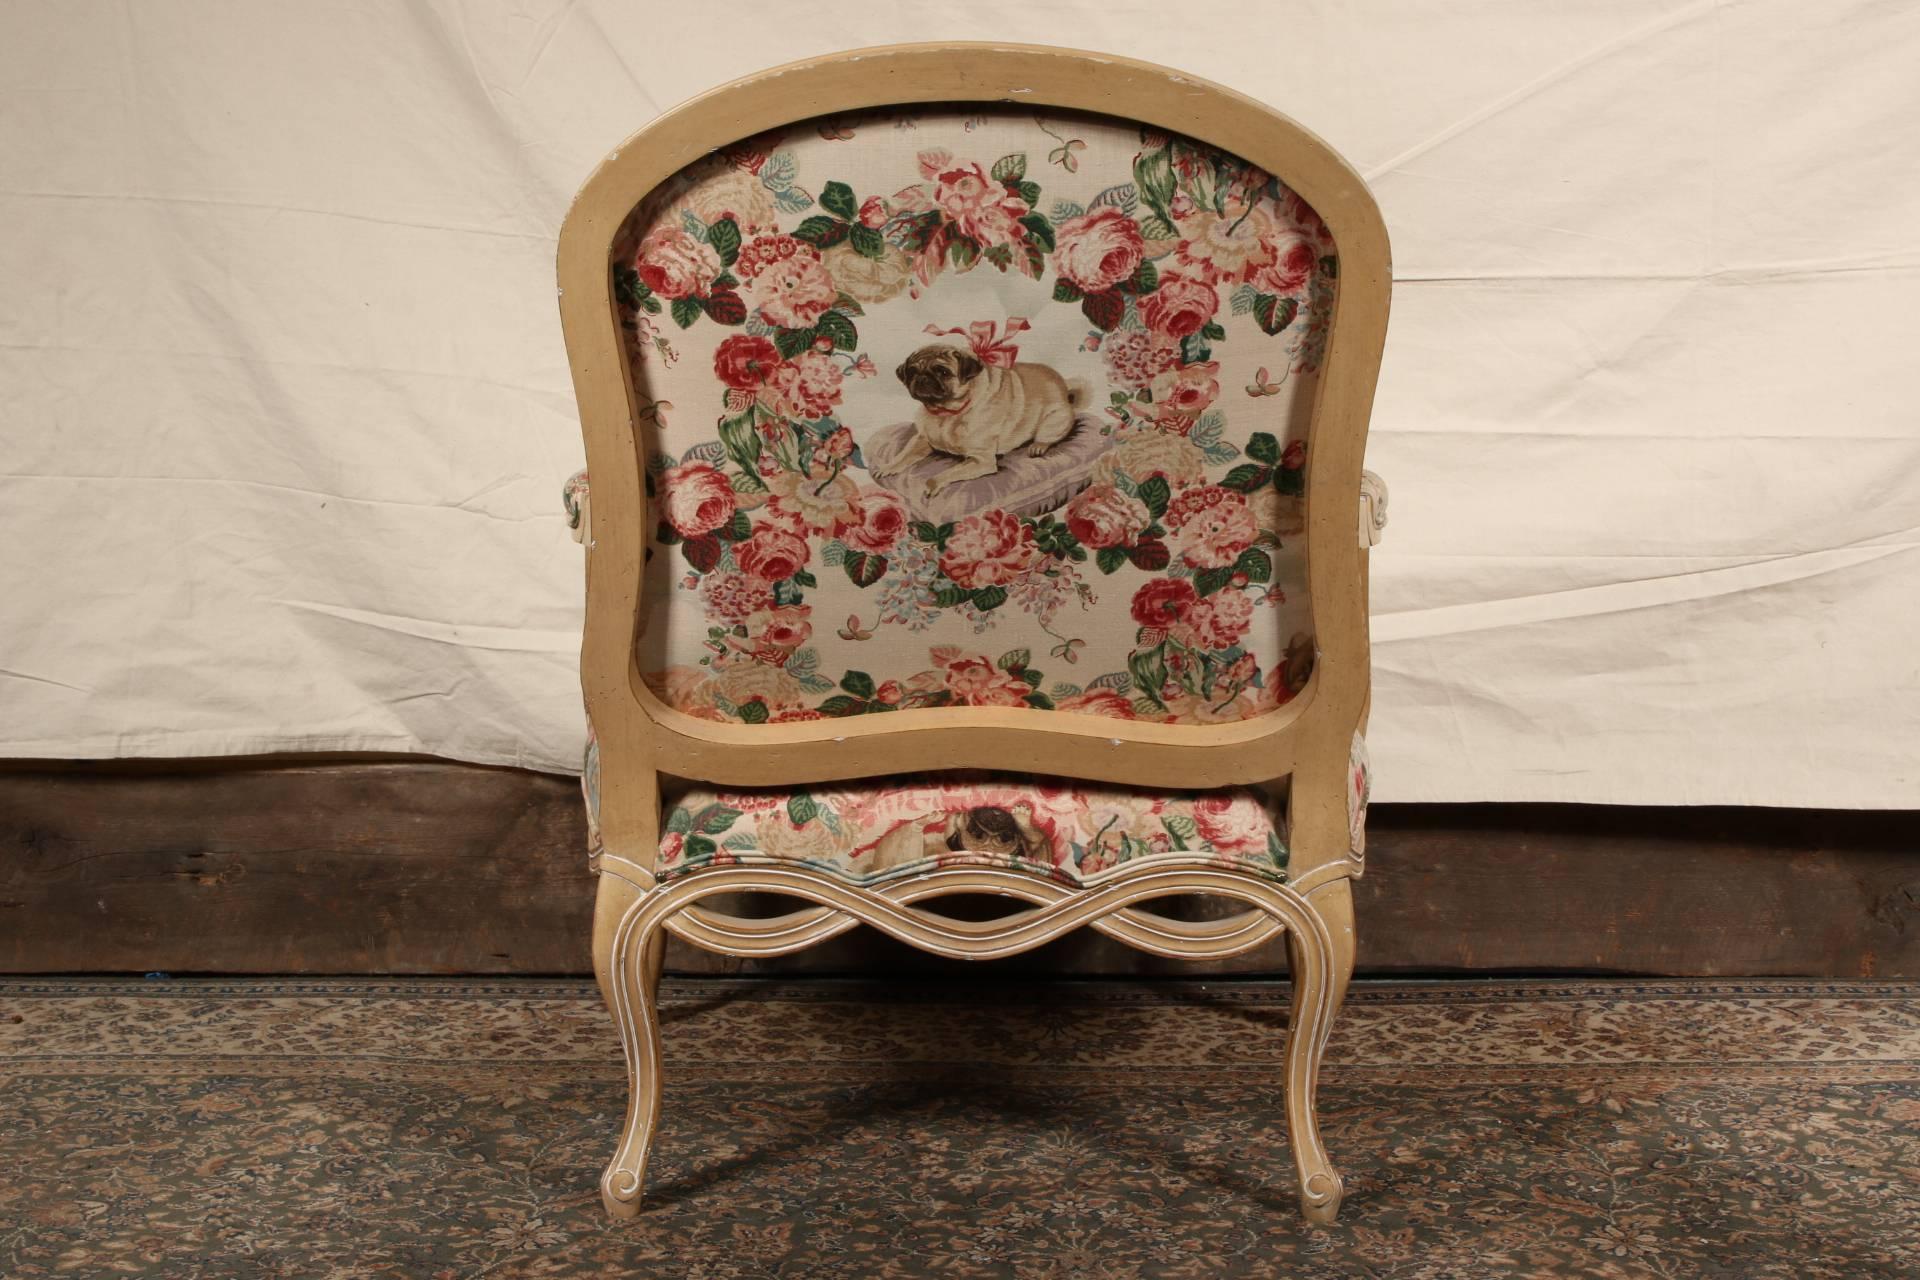 French Provincial Pair of Kreiss Paint Decorated Fauteuils in Lee Jofa Pugs and Petals Fabric